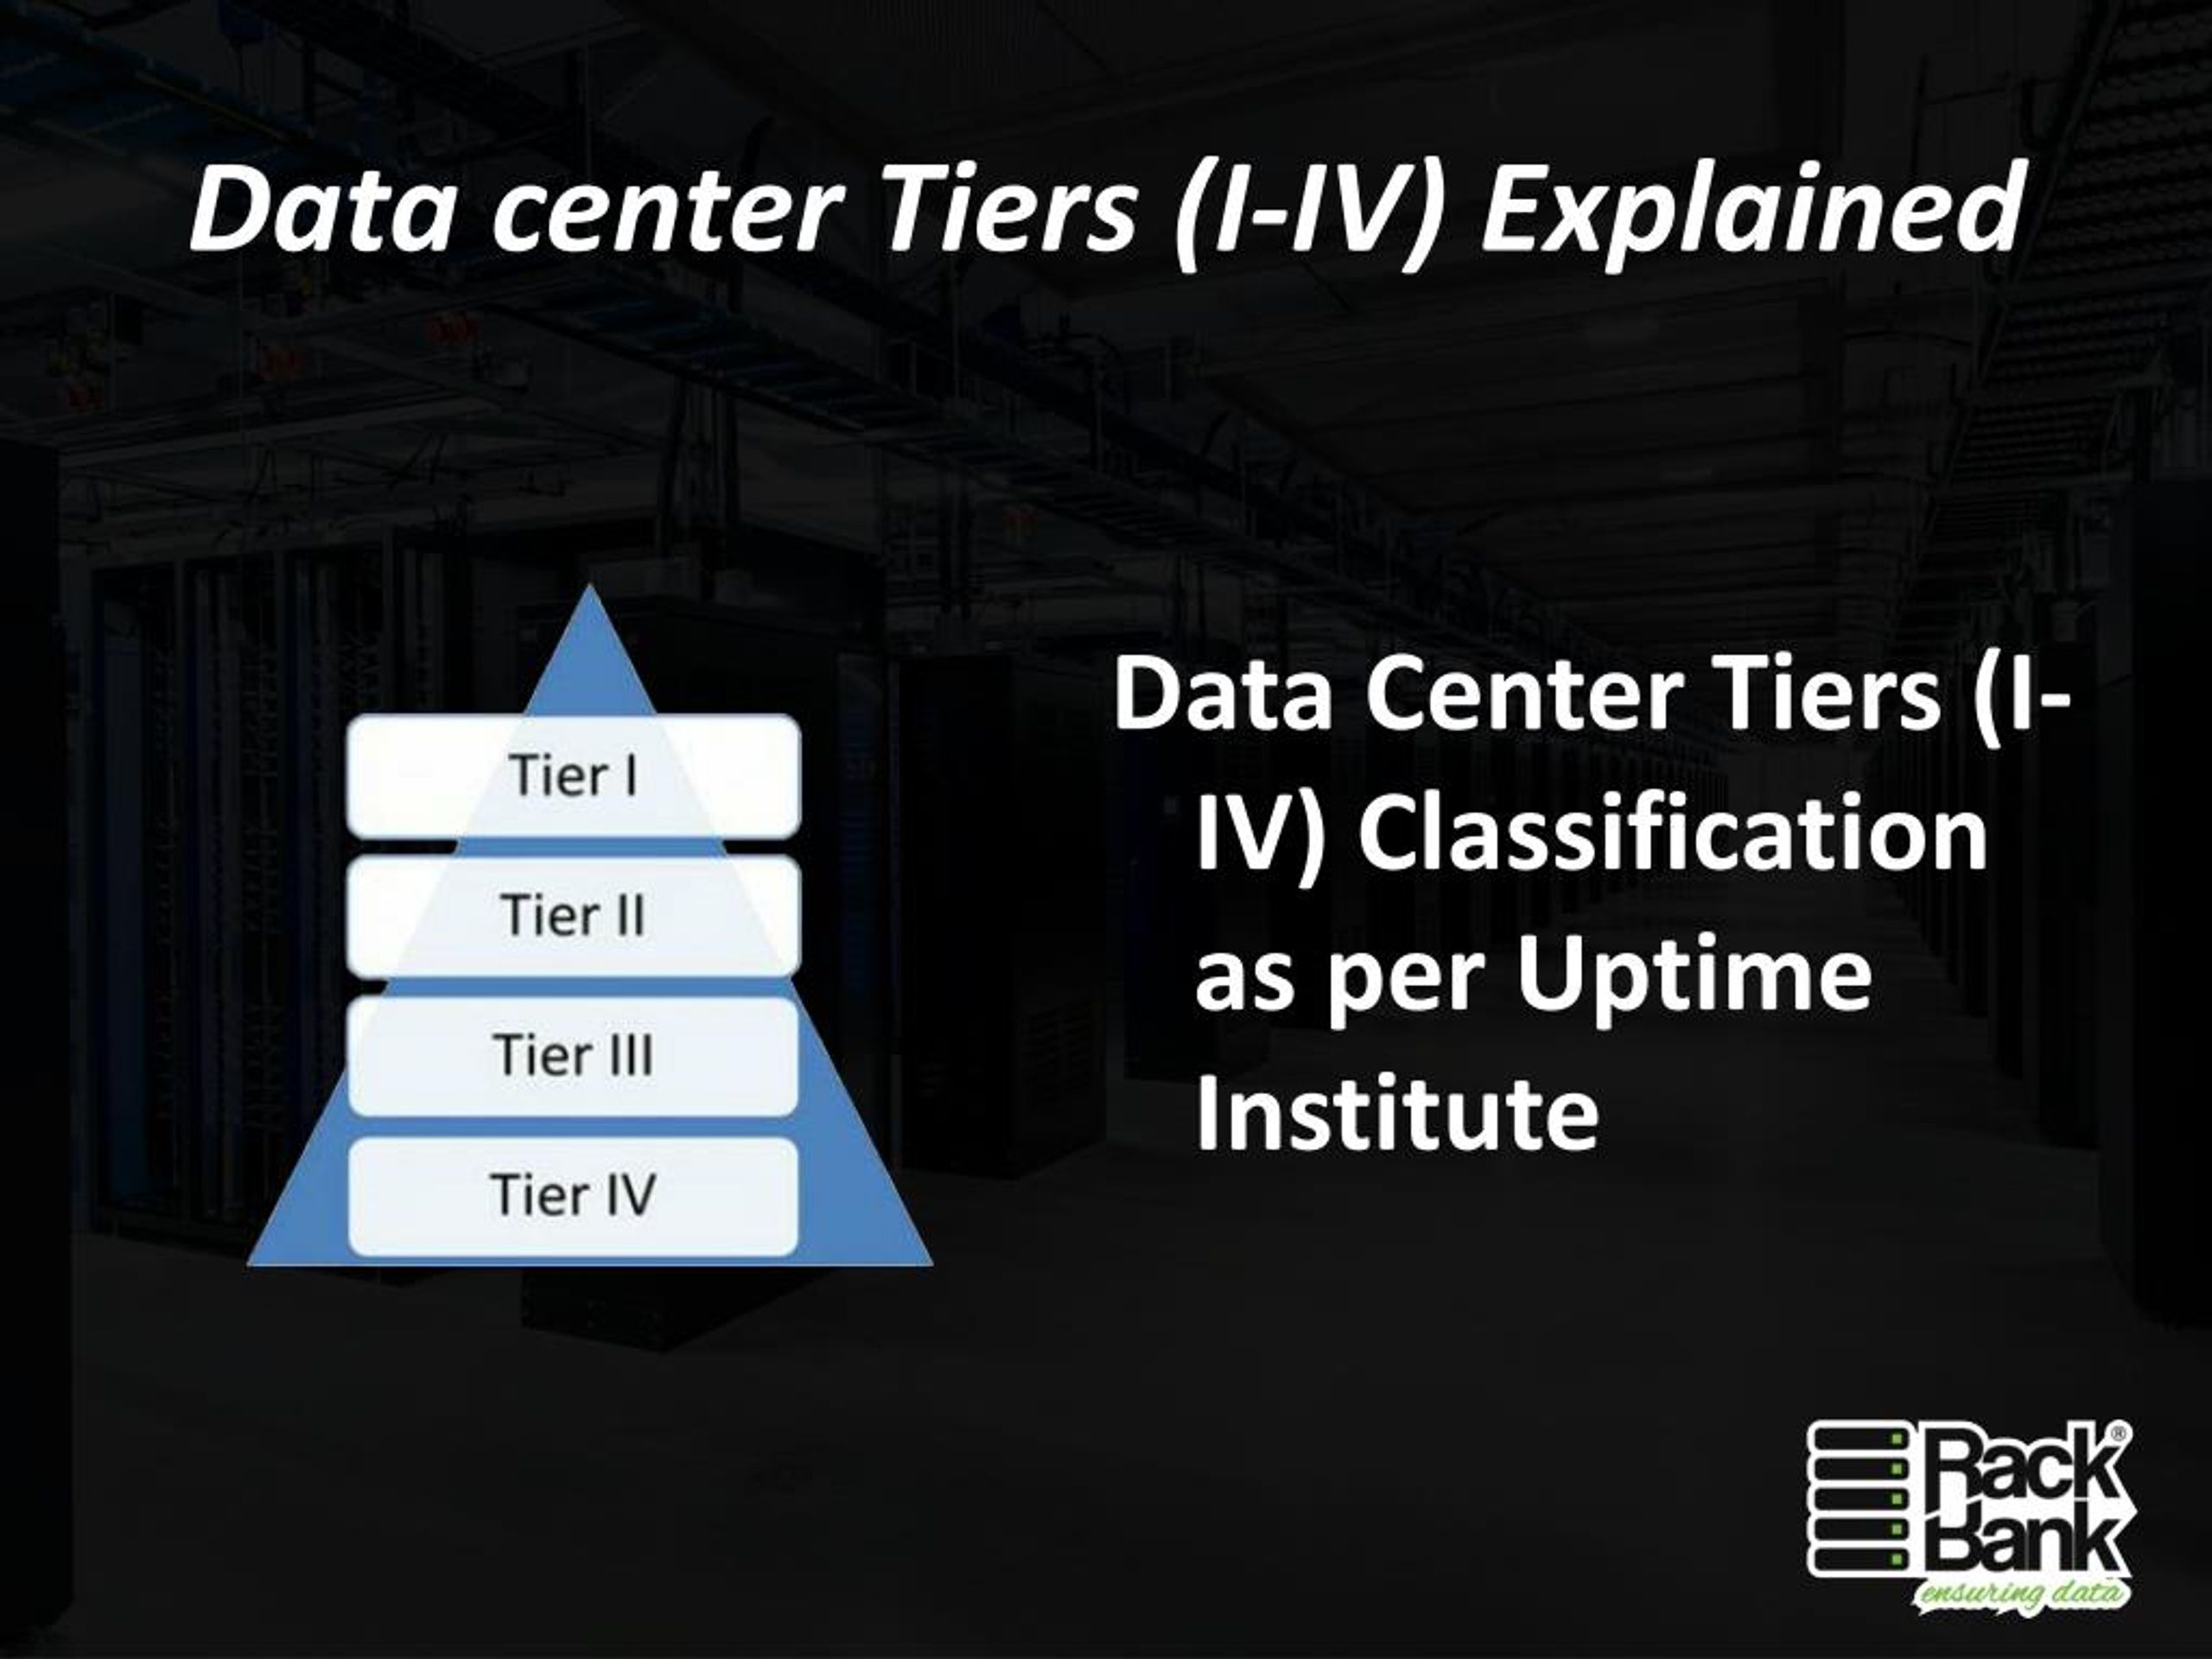 Data Center Tiers Explained: Tier I, II and III